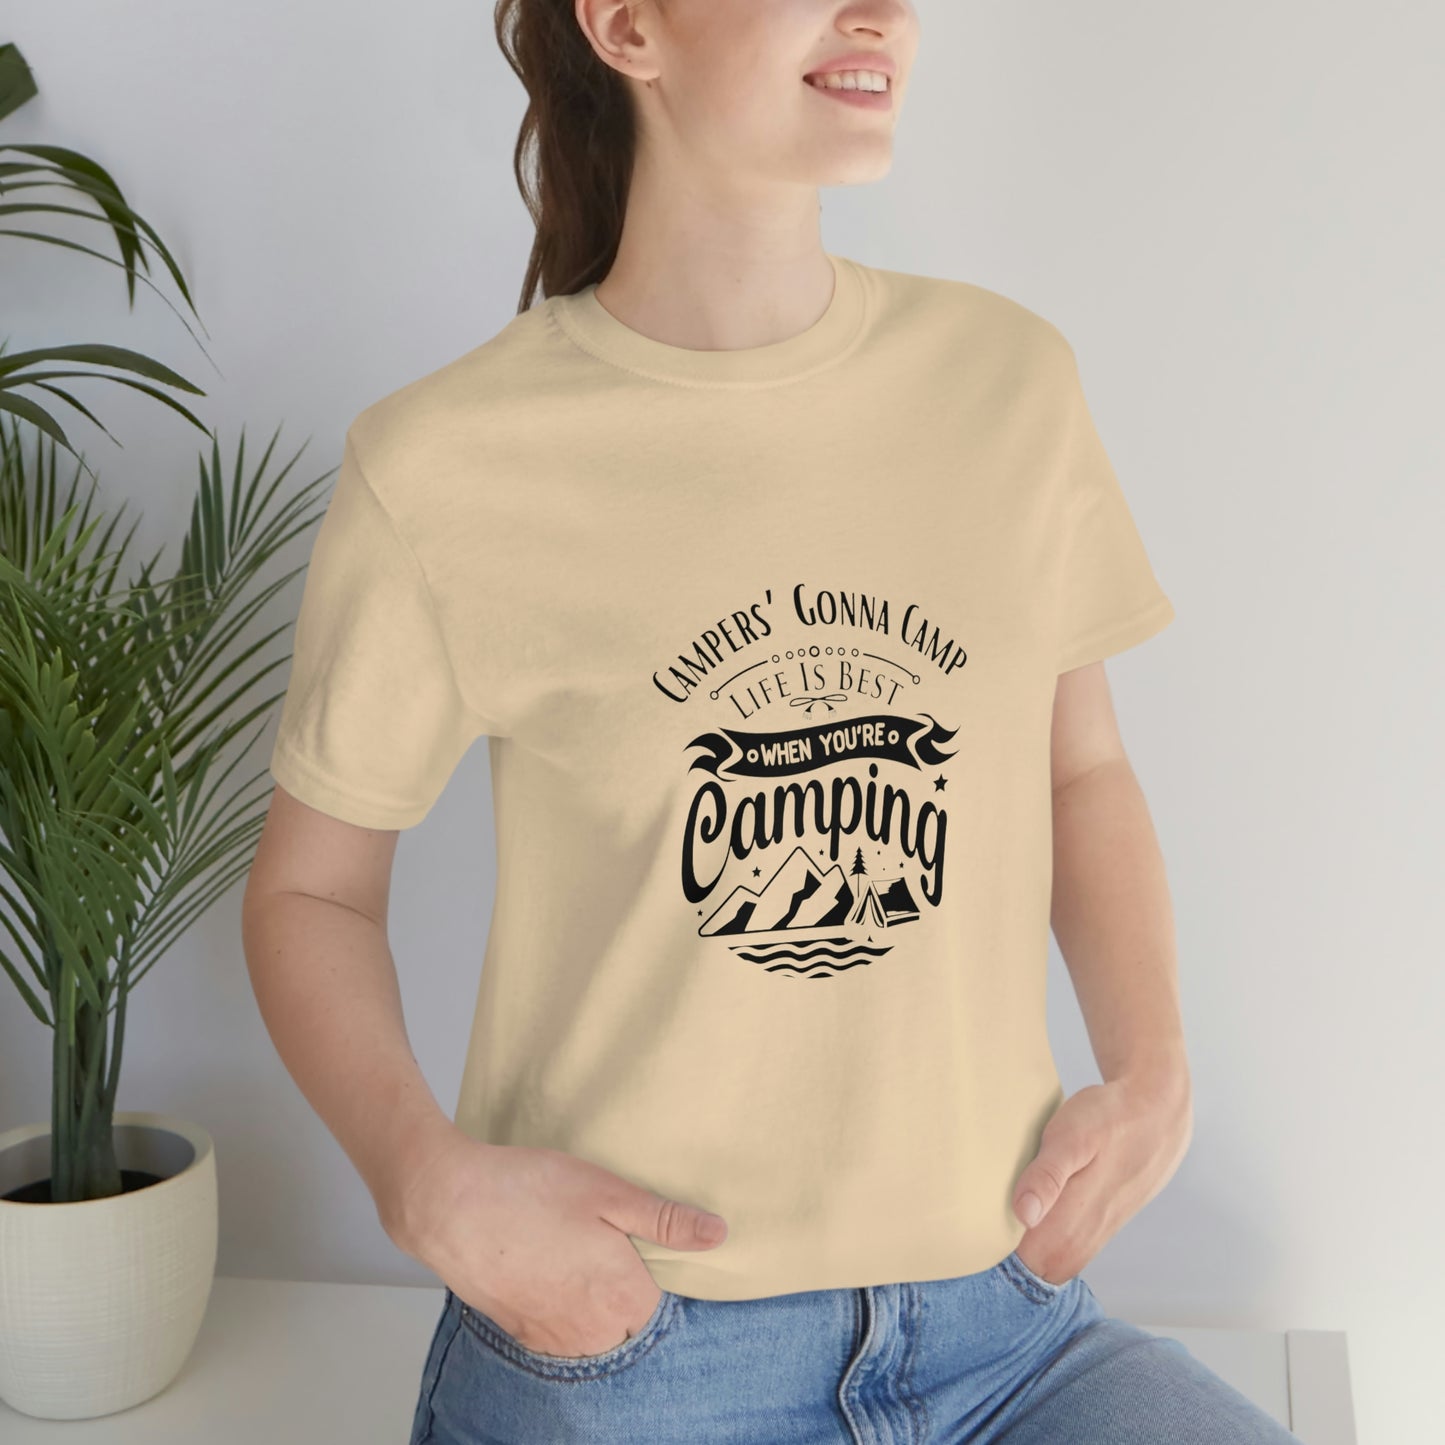 ‘Campers gonna camp’ Unisex Jersey Short Sleeve Tee